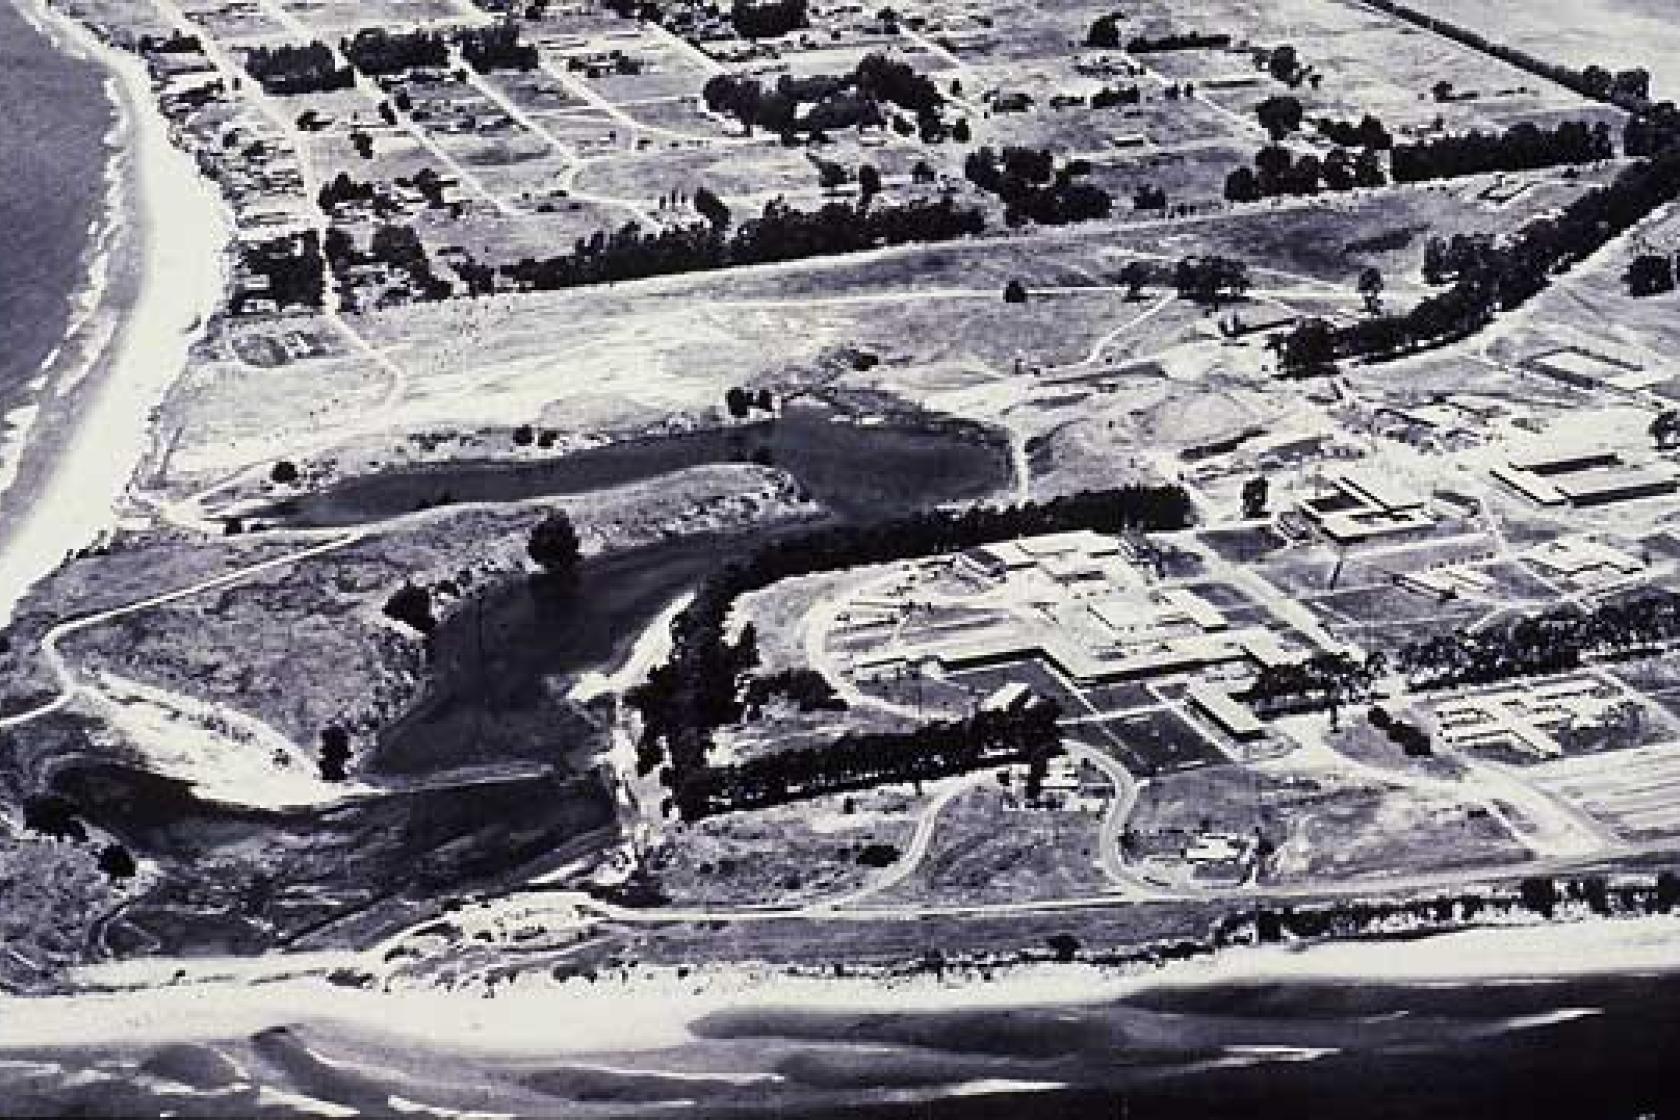 UCSB Campus Pt. aerial view, black and white archival photo -70s